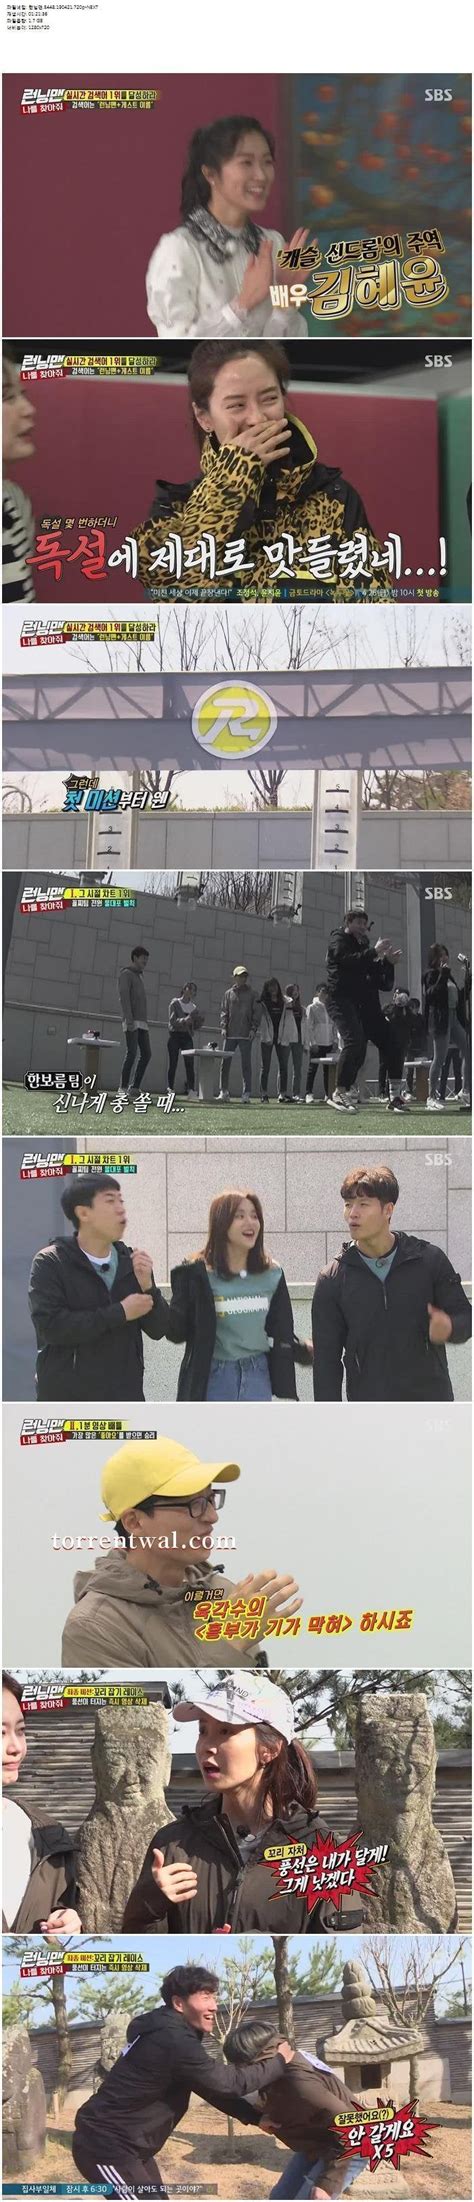 Running Man Ep 448 Typo In Original Post With Solji And Hani Subtitles In The Comments R Exid